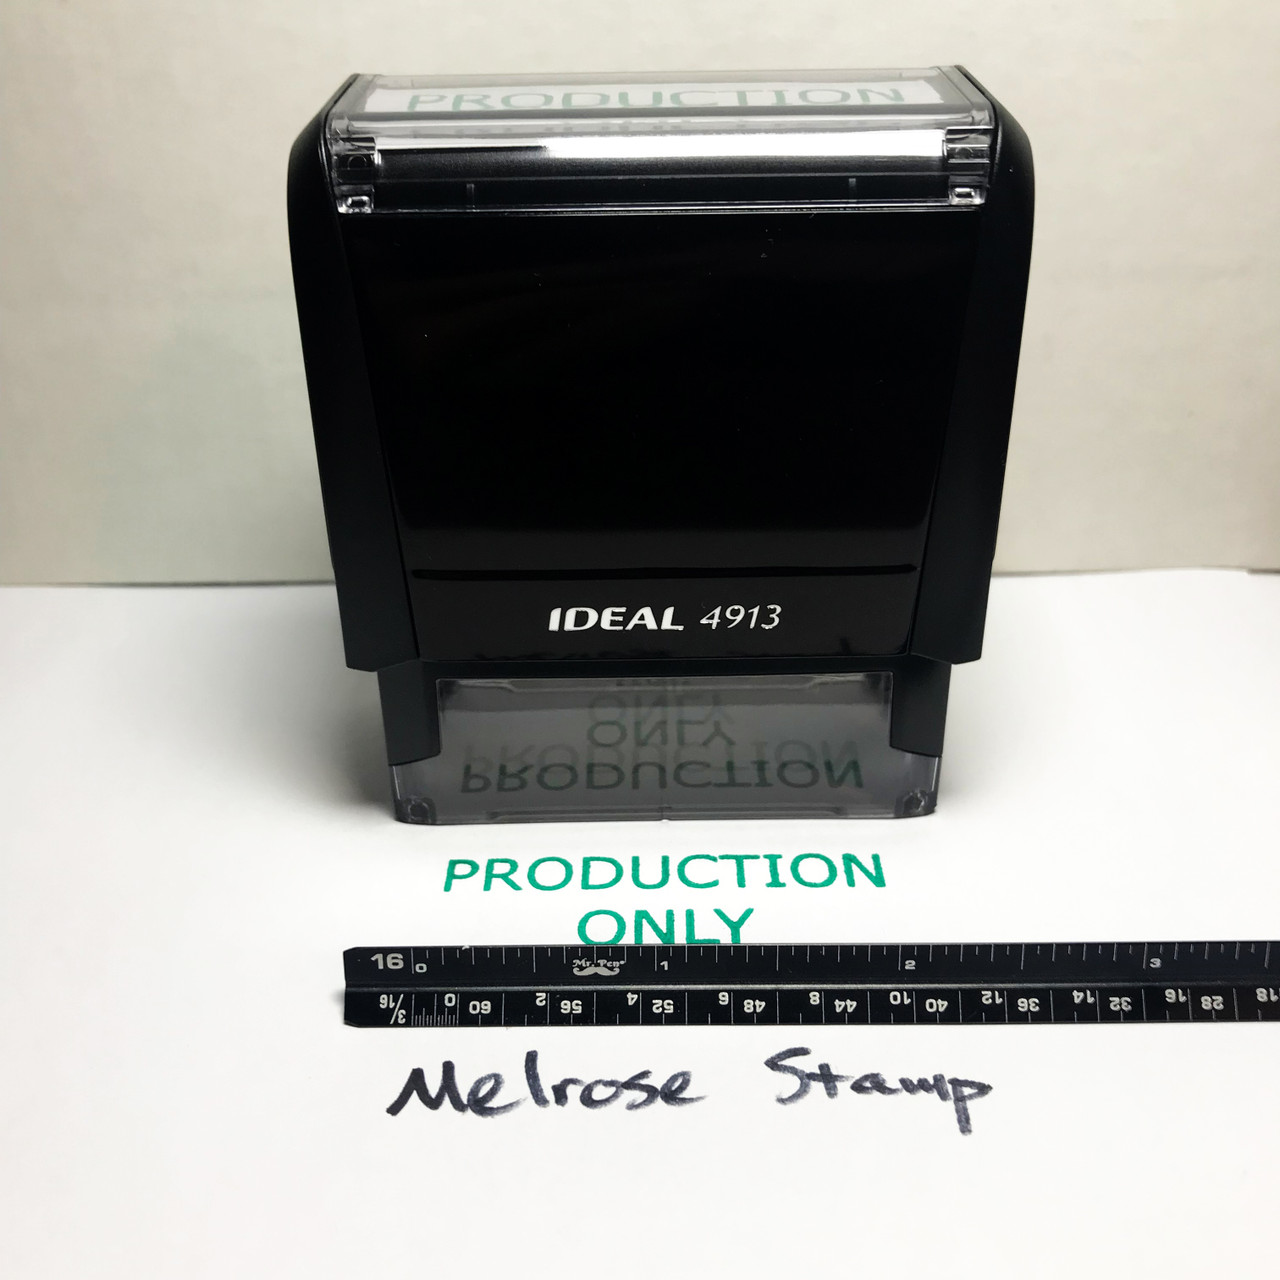 PRODUCTION ONLY Rubber Stamp for office use self-inking